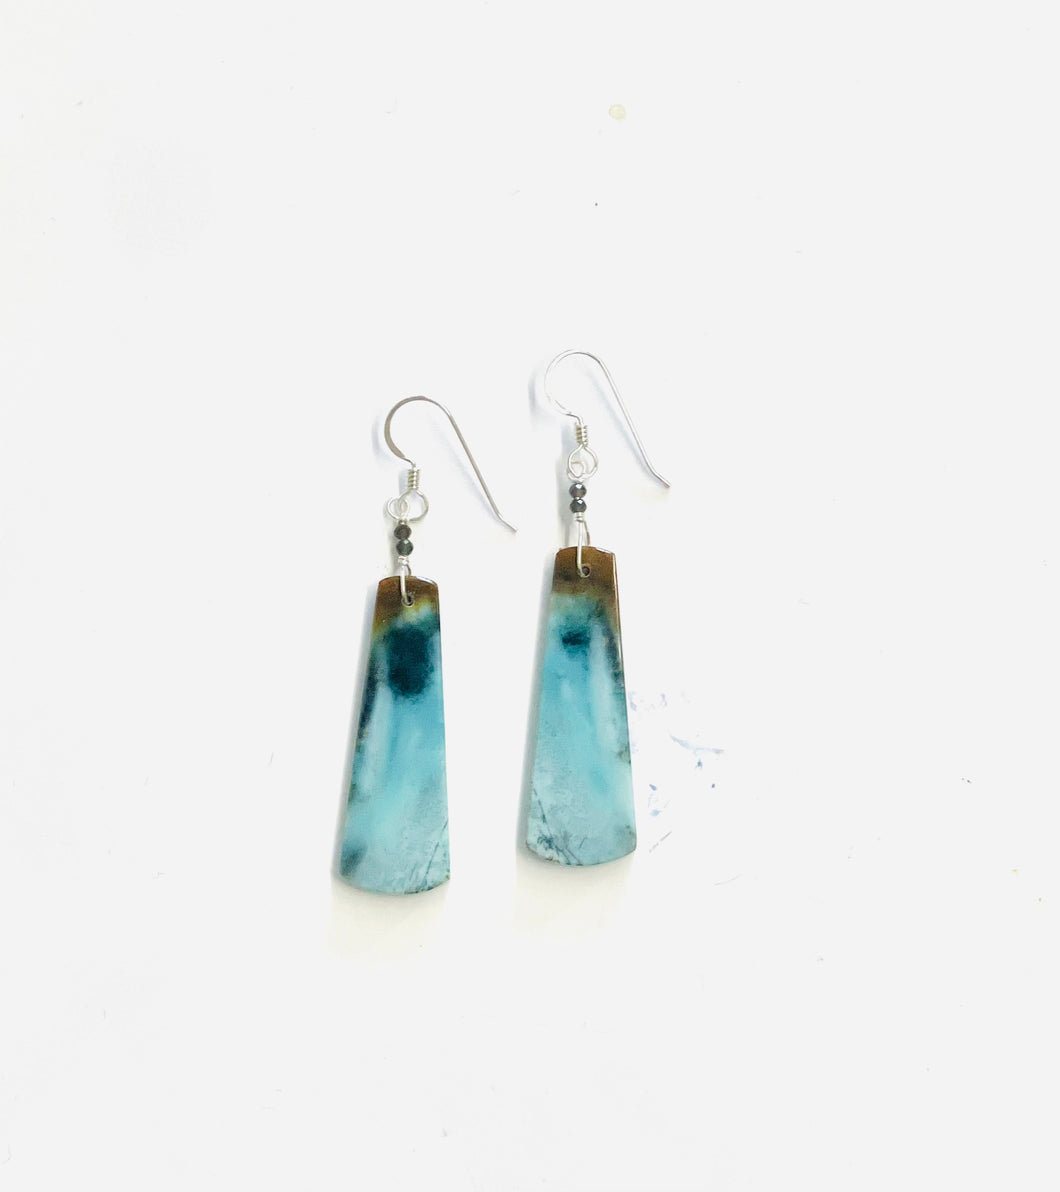 Earrings with light blue and brown opalized wood